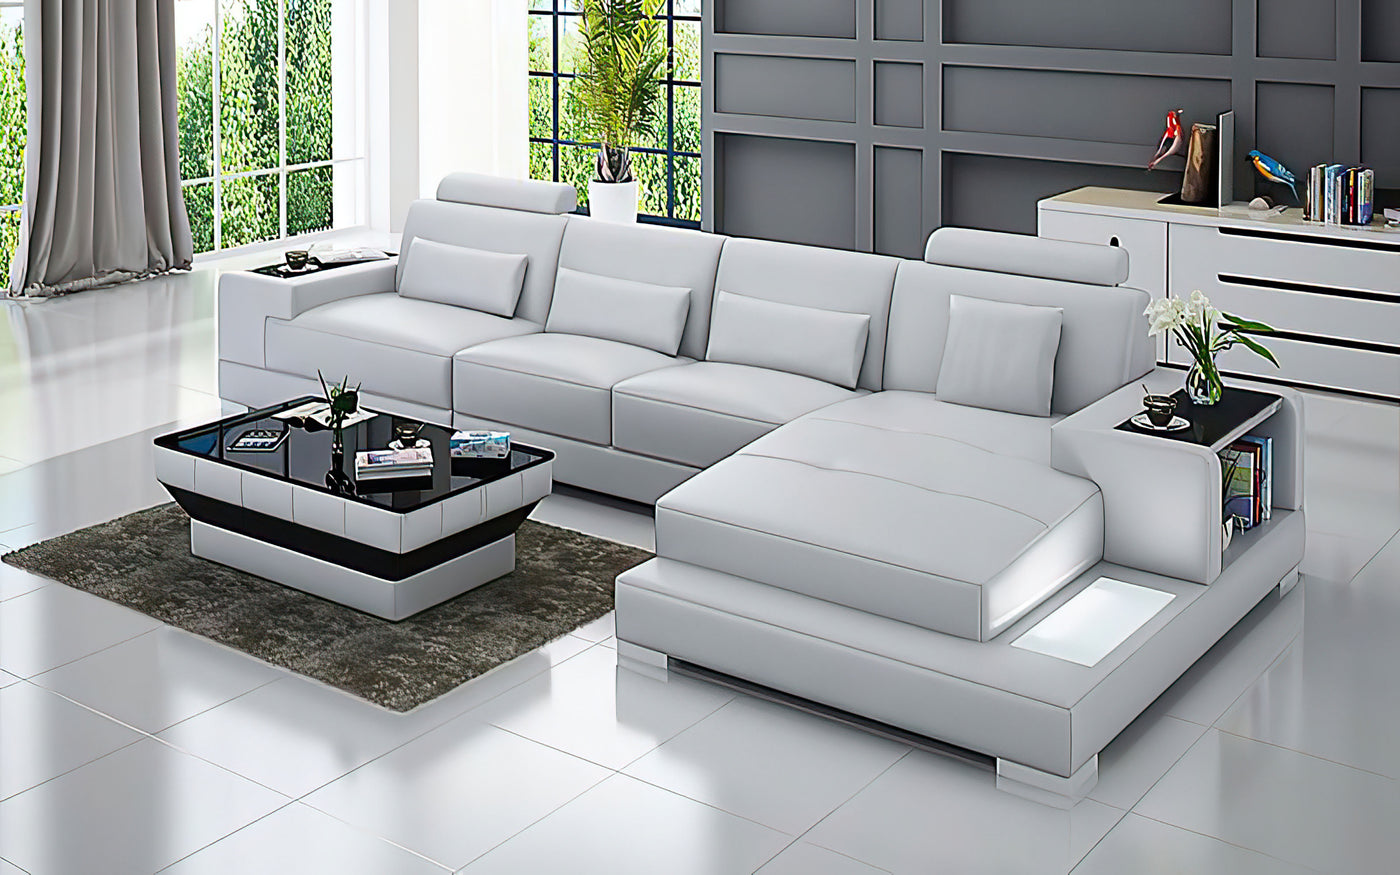 Giana Small Modern Leather Sectional